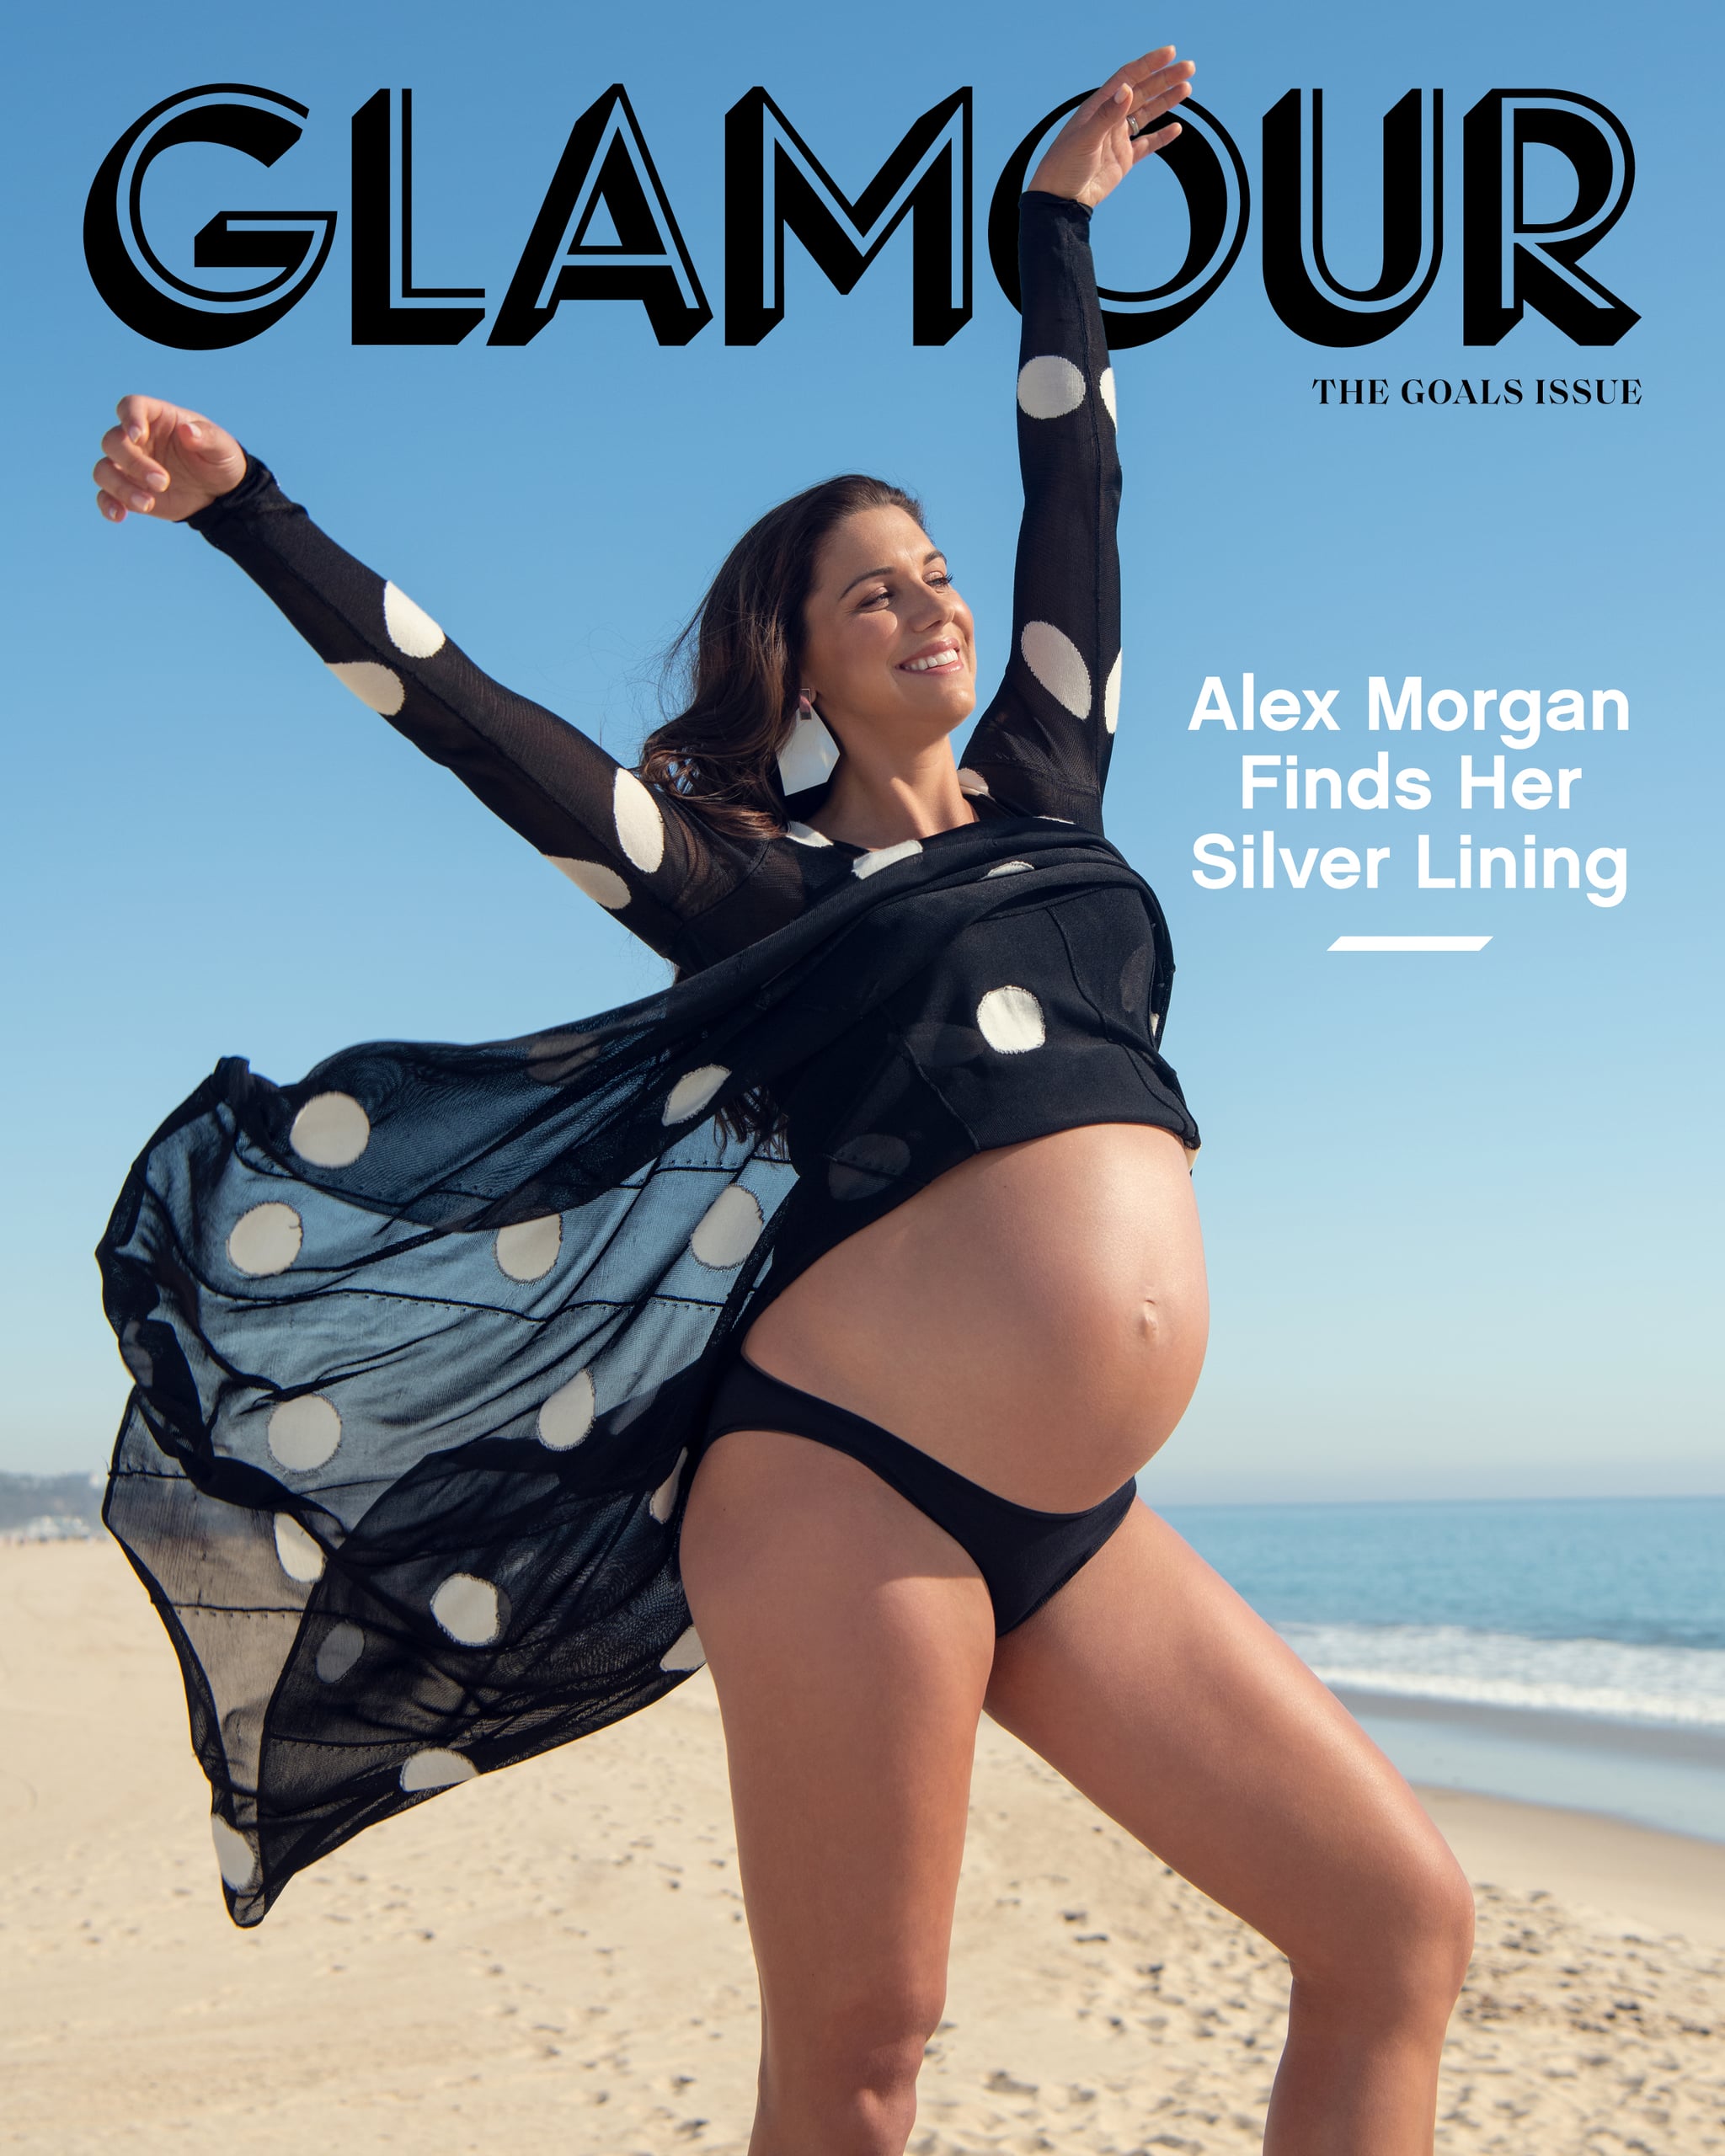 Glamour Goals Issue With Alex Morgan